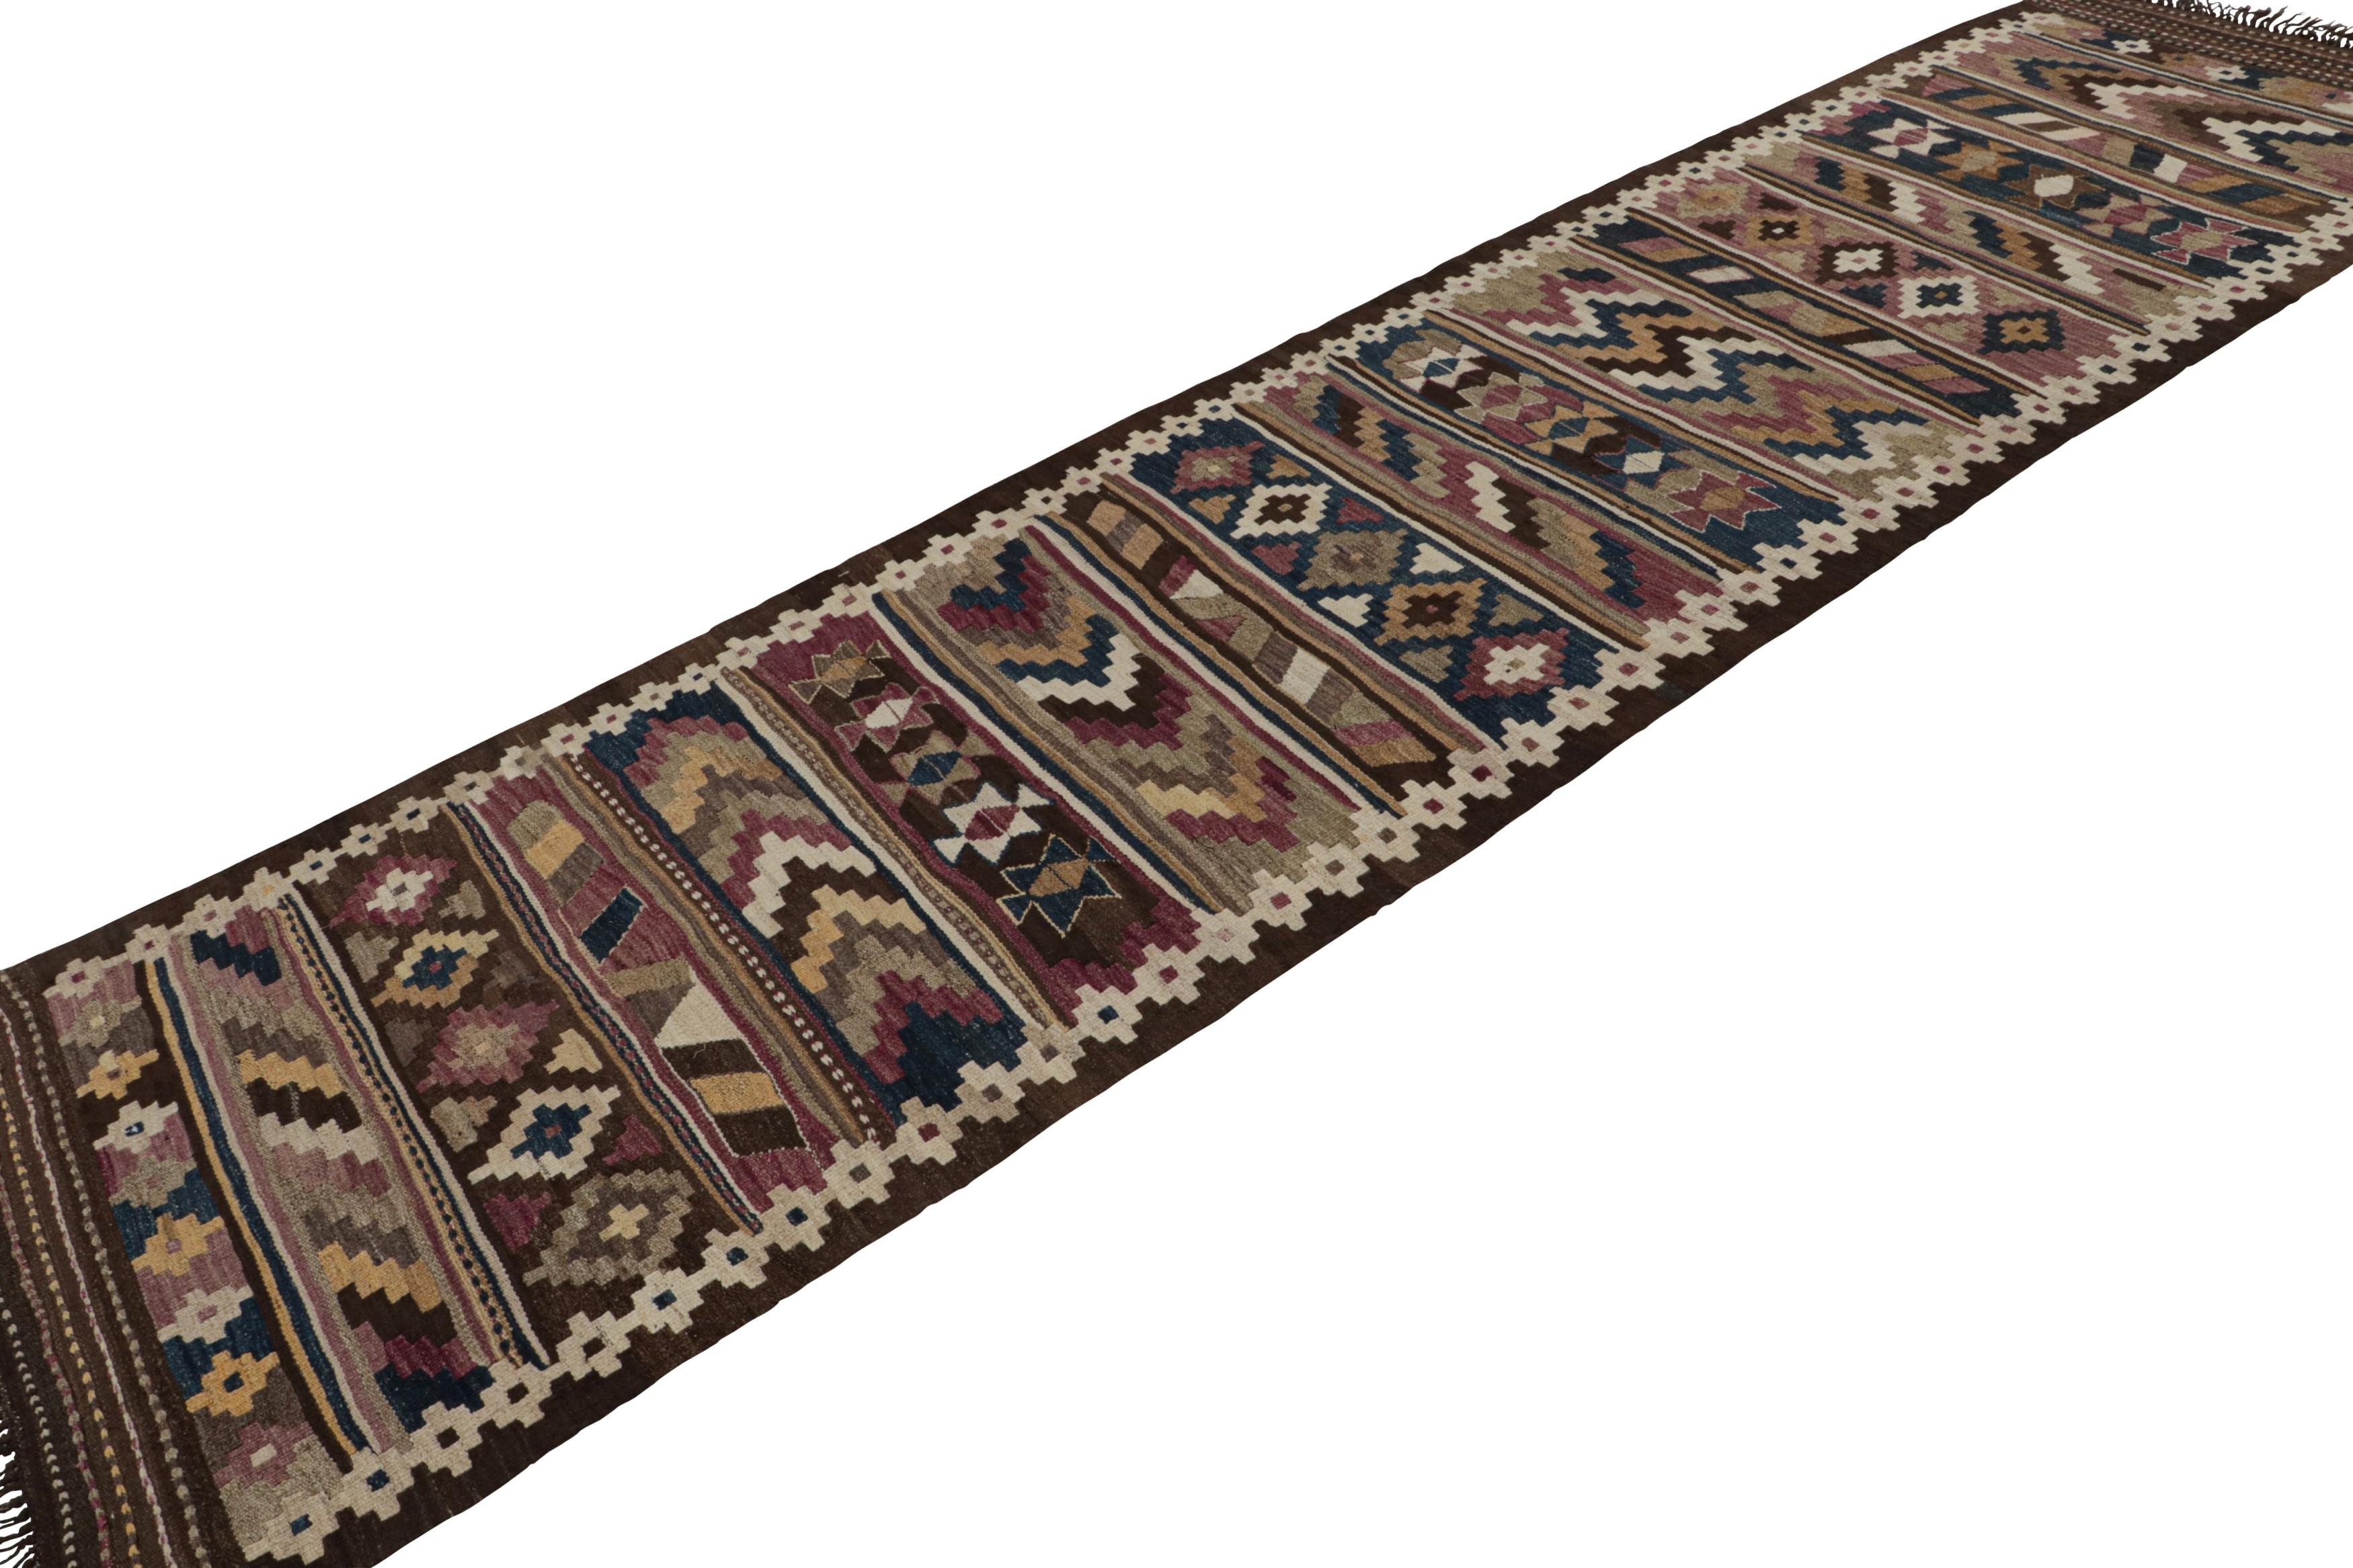 Hand-knotted in wool, this 3x14 vintage Persian tribal extra-long kilim runner rug has mosaic-like geometric patterns in beige/brown, red, blue, silver/gray, all over the field. 

On the Design: 

Connoisseurs will appreciate the vibrant blend of a